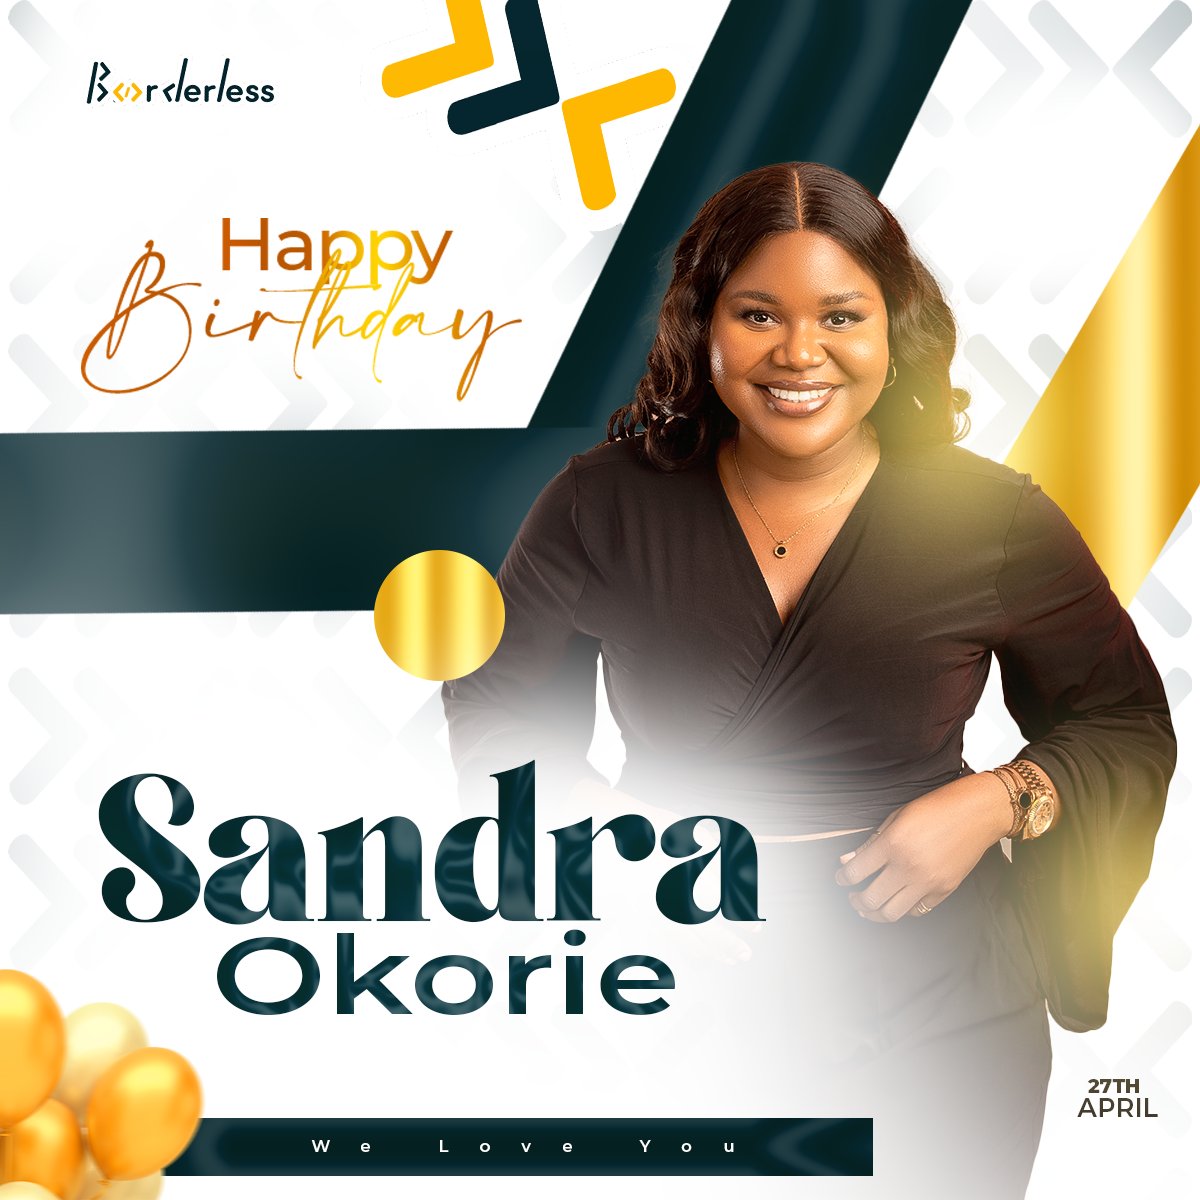 We're saying a big HAPPY BIRTHDAY 🎂🎈 to @KokoSandra founder at @skillphore

Happy Birthday ma'am, thank you so much for all you do for our Data Analyst graduates at B<>rder/ess.

Thank you for connecting young #DataAnalysts with jobs and opportunities.

We love you 😘❤️